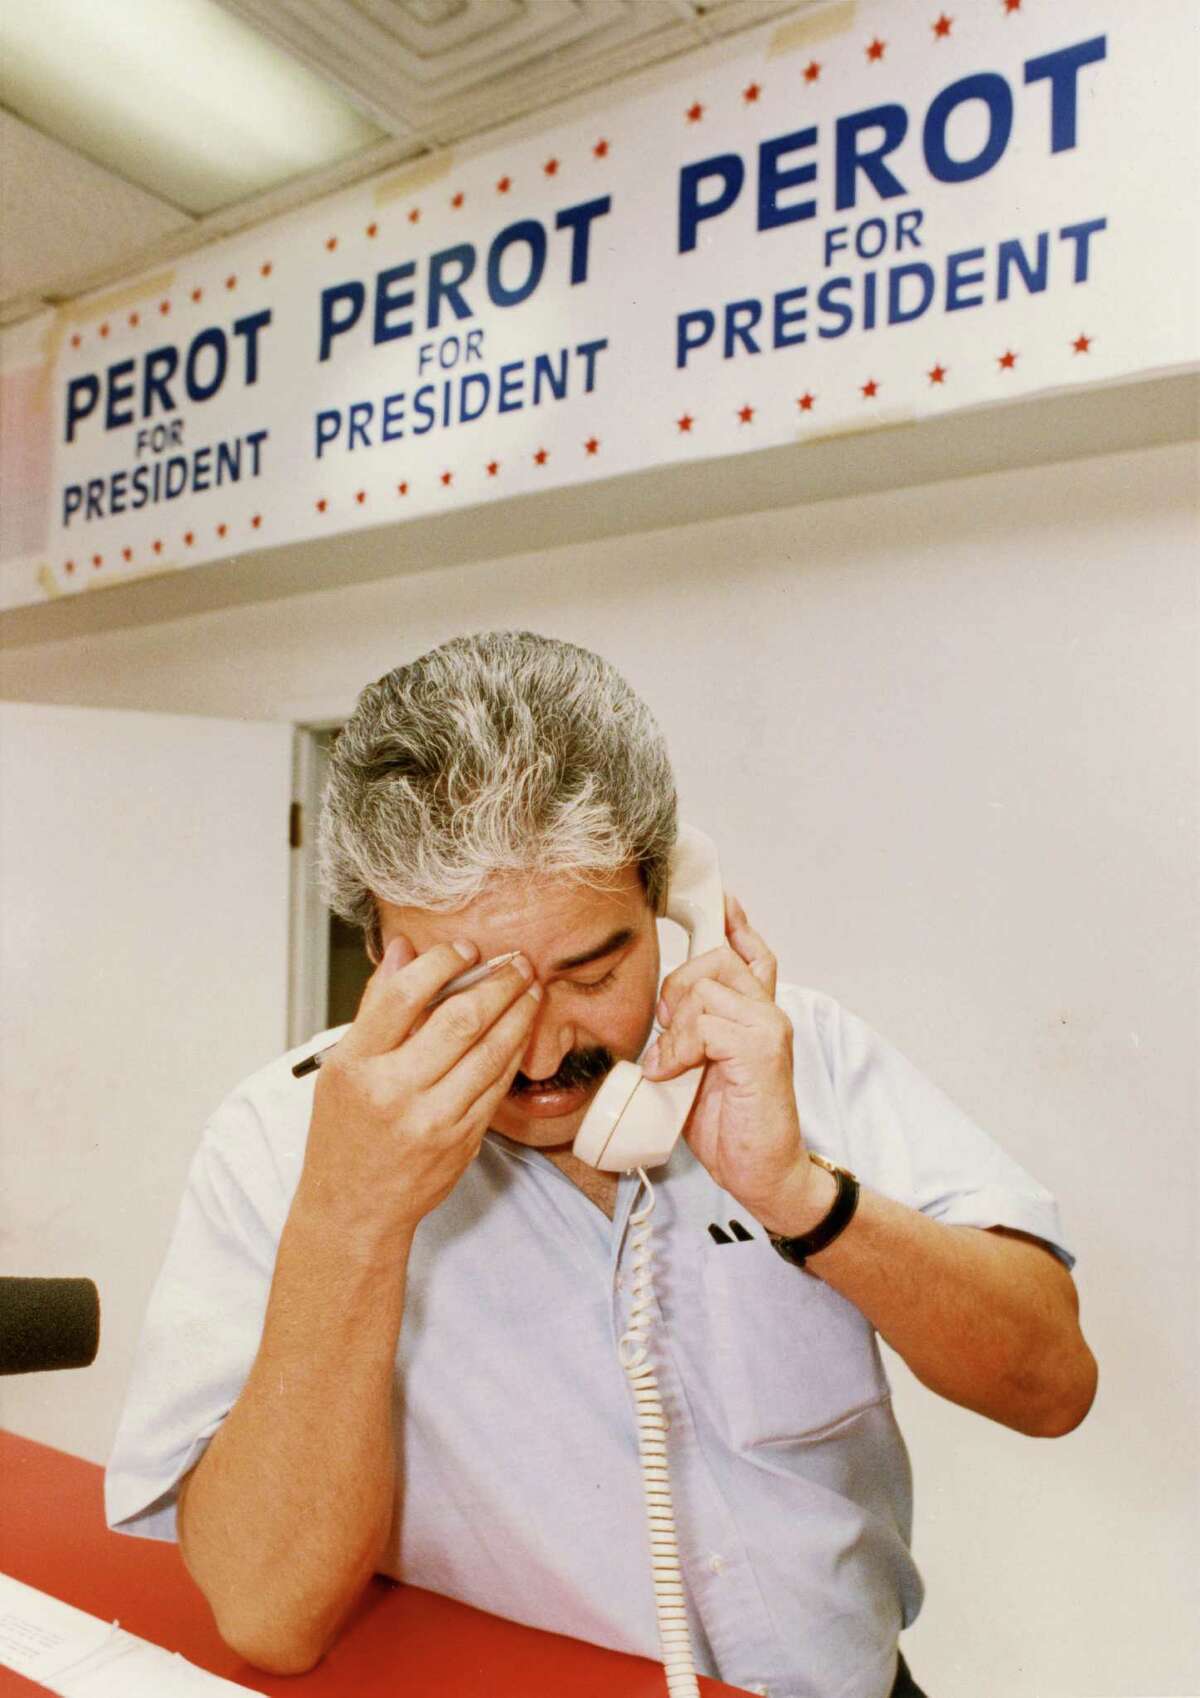 07/16/1992 - Joe Martinez, office manager for the "Perot for President" Houston downtown headquarters, 910 Main, handles a phonecall moments after H. Ross Perot announced he was cutting short his drive for the White House. Perot volunteers at the Houston-area offices spent most of the day answering phones trying to calm angry callers.